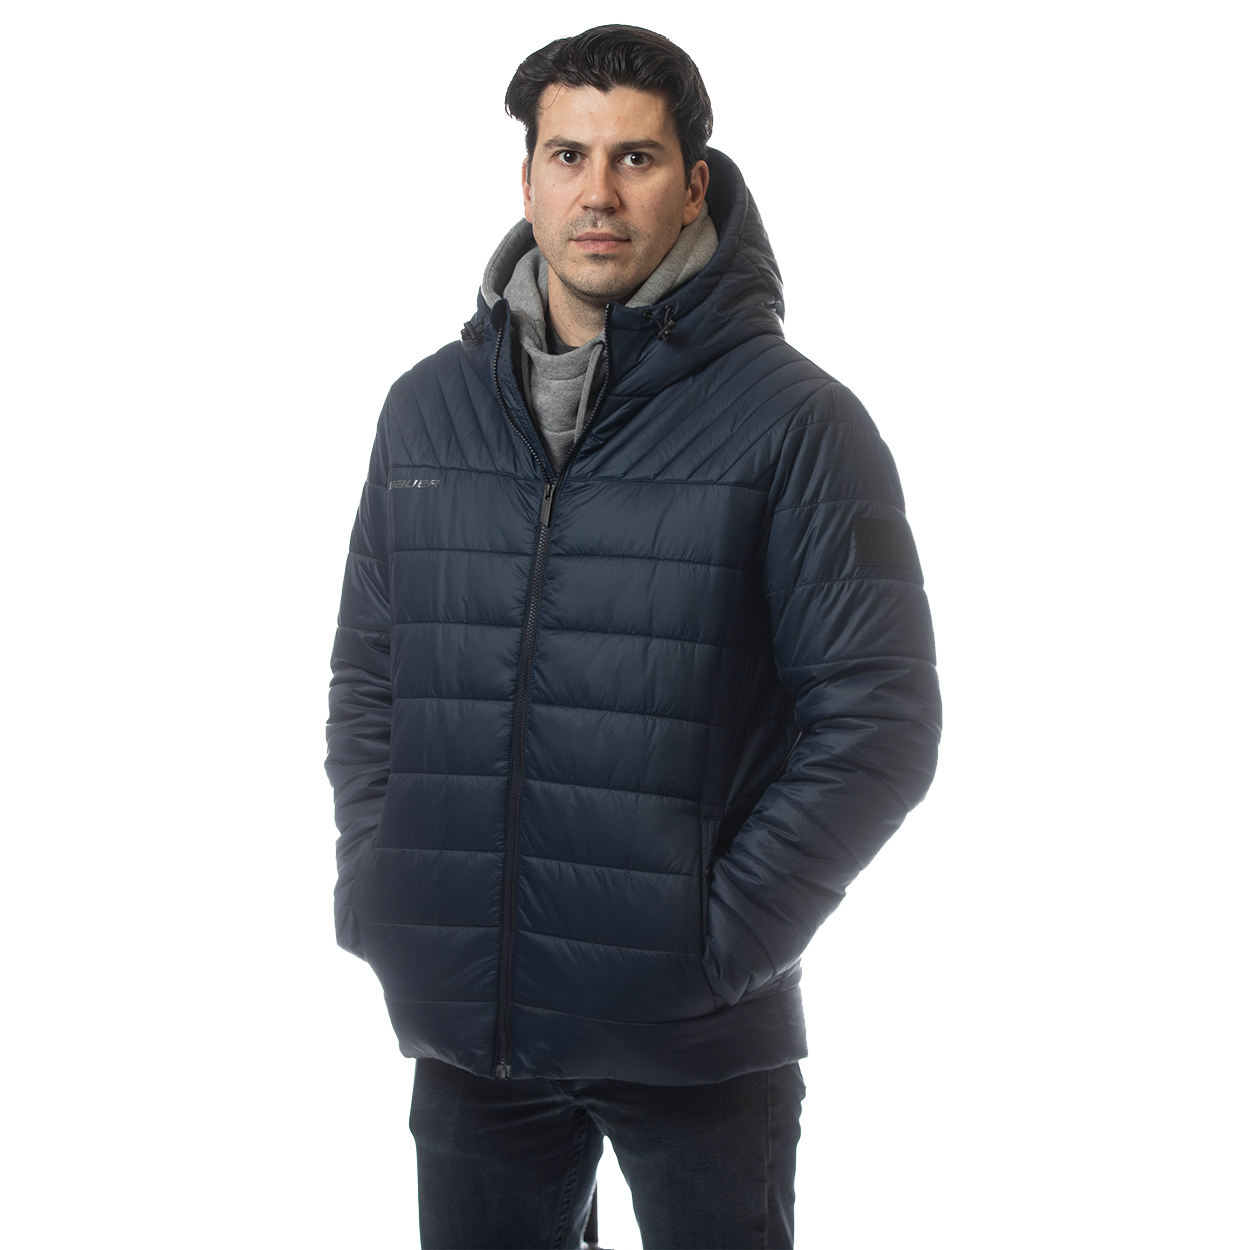 BAUER SUPREME HOODED PUFFER JACKET YOUTH